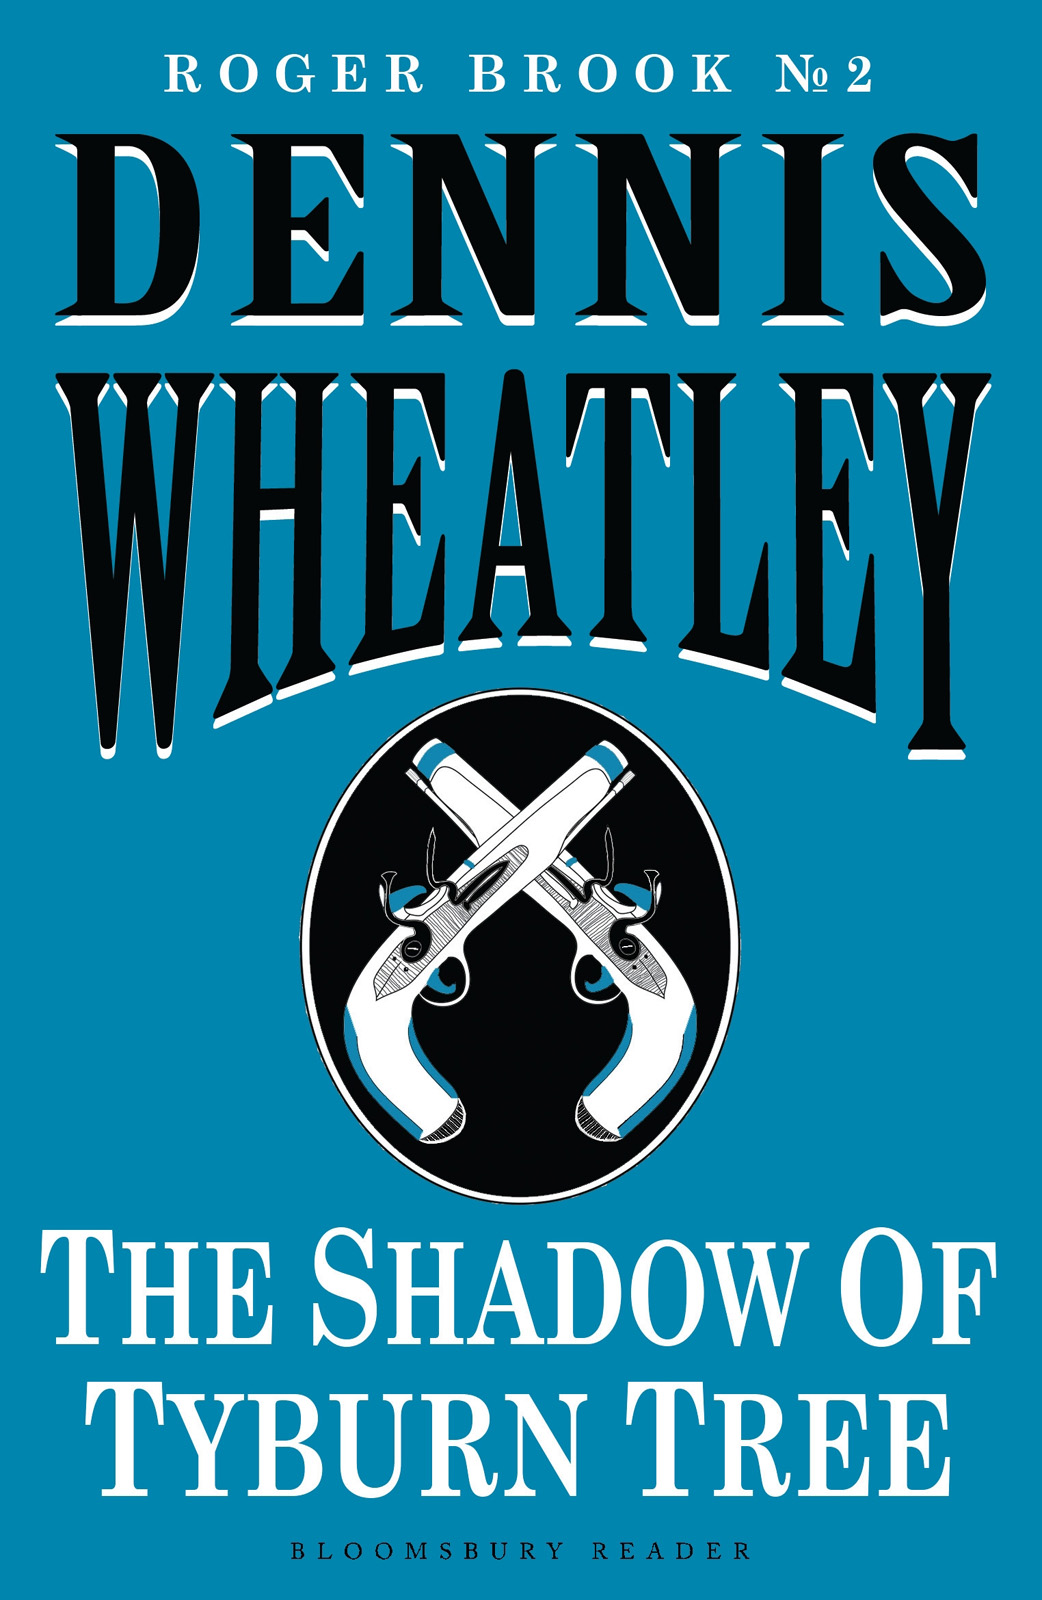 The Shadow of Tyburn Tree (1970) by Dennis Wheatley